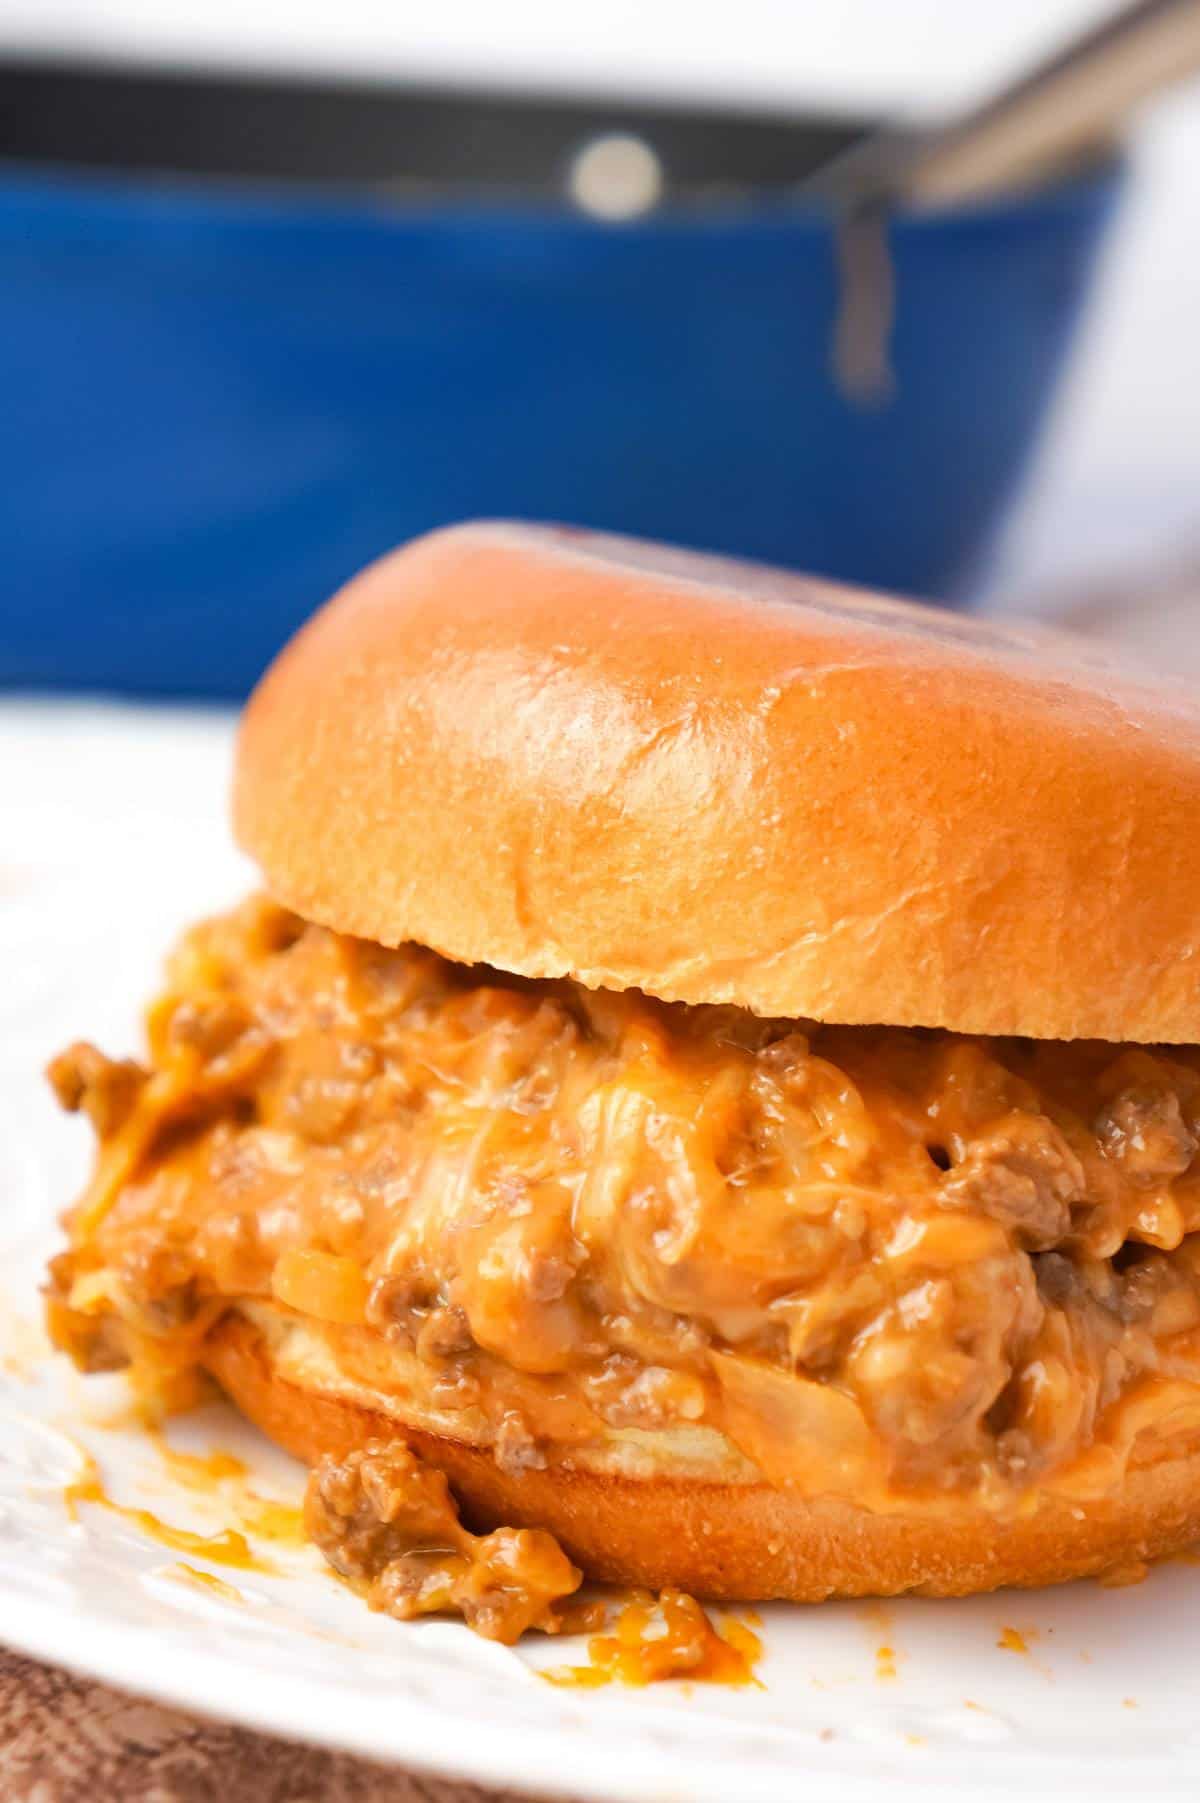 Cheesy Sloppy Joes are an easy weeknight dinner recipe using ground beef tossed in sloppy joe sauce, condensed cheddar cheese soup and shredded mozzarella and cheddar cheese all piled on to toasted brioche buns.